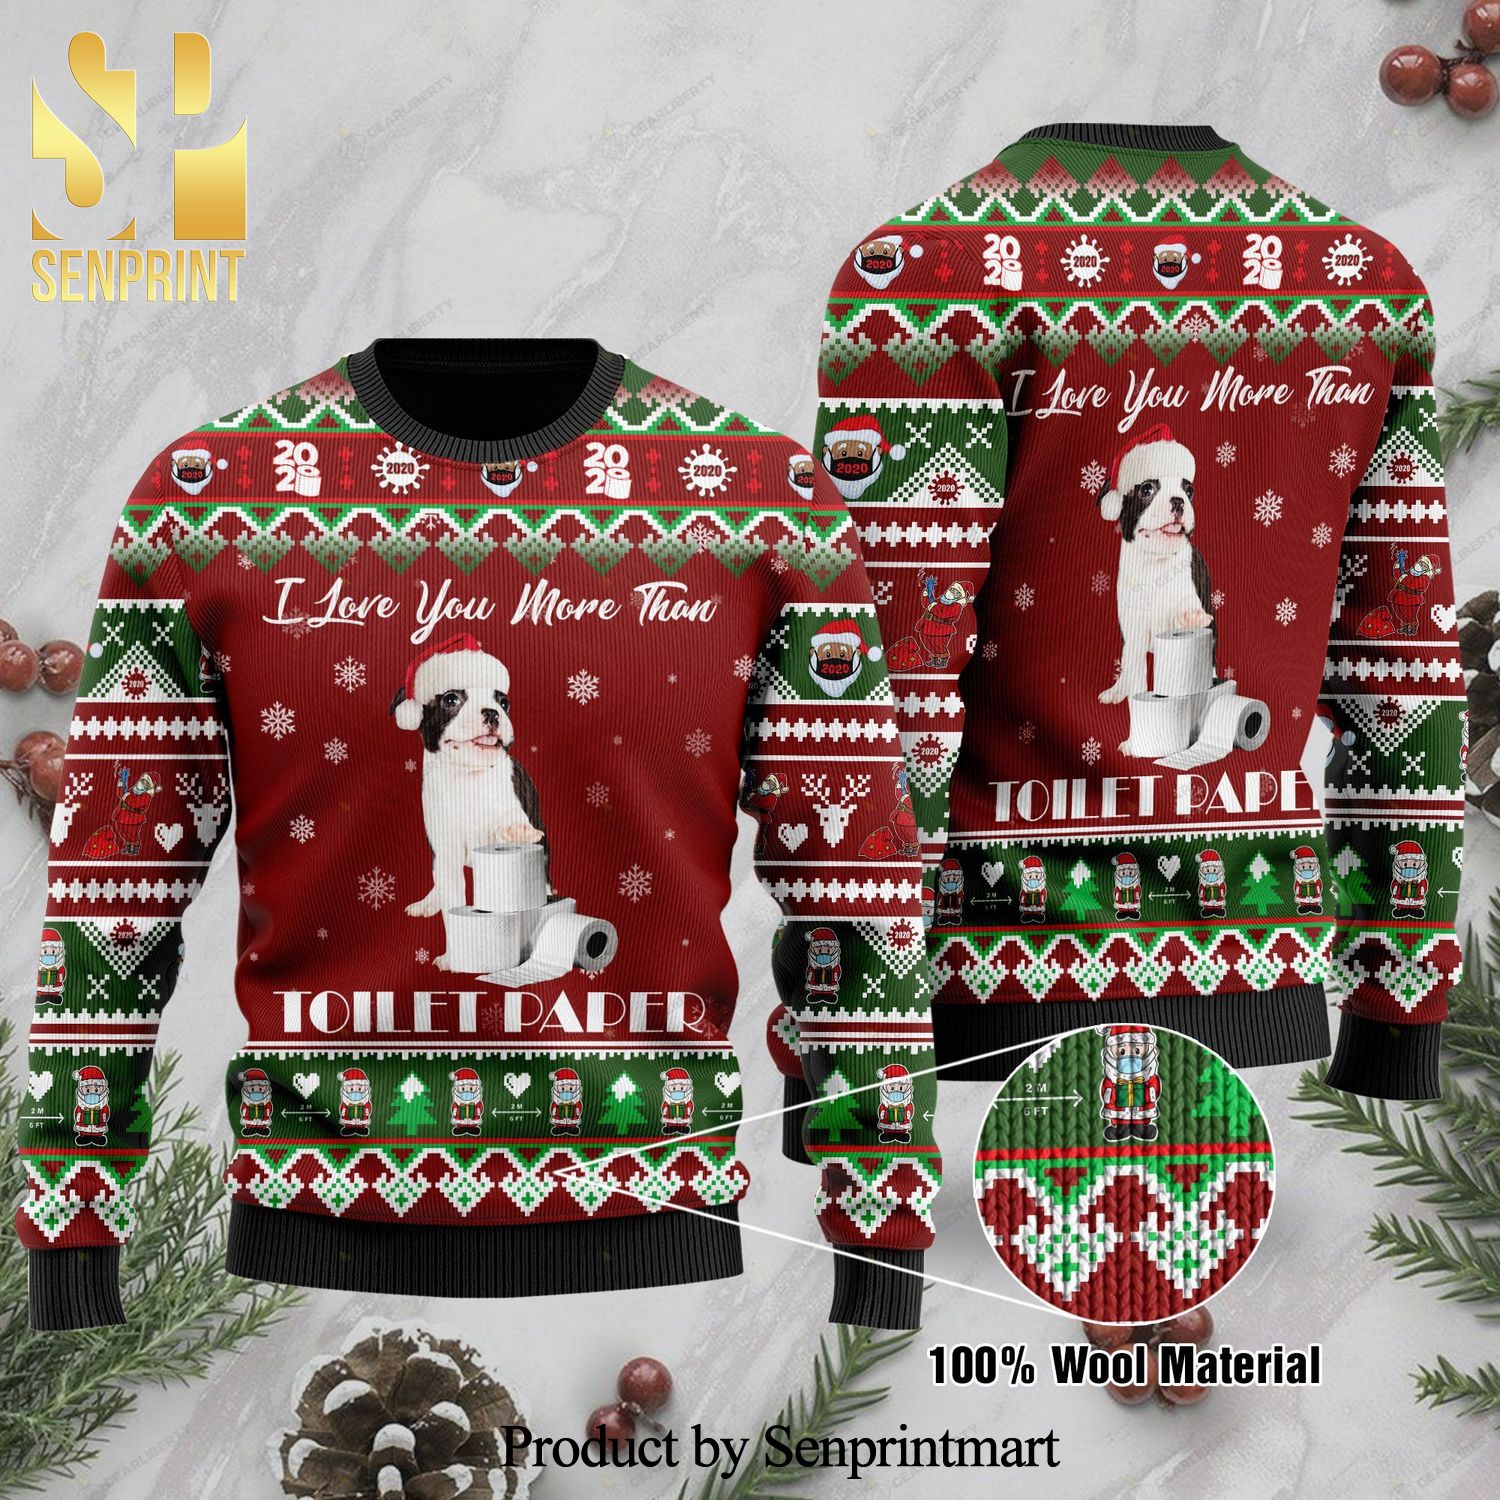 Boston Terrier I Love You More Than Toilet Paper Knitted Ugly Christmas Sweater